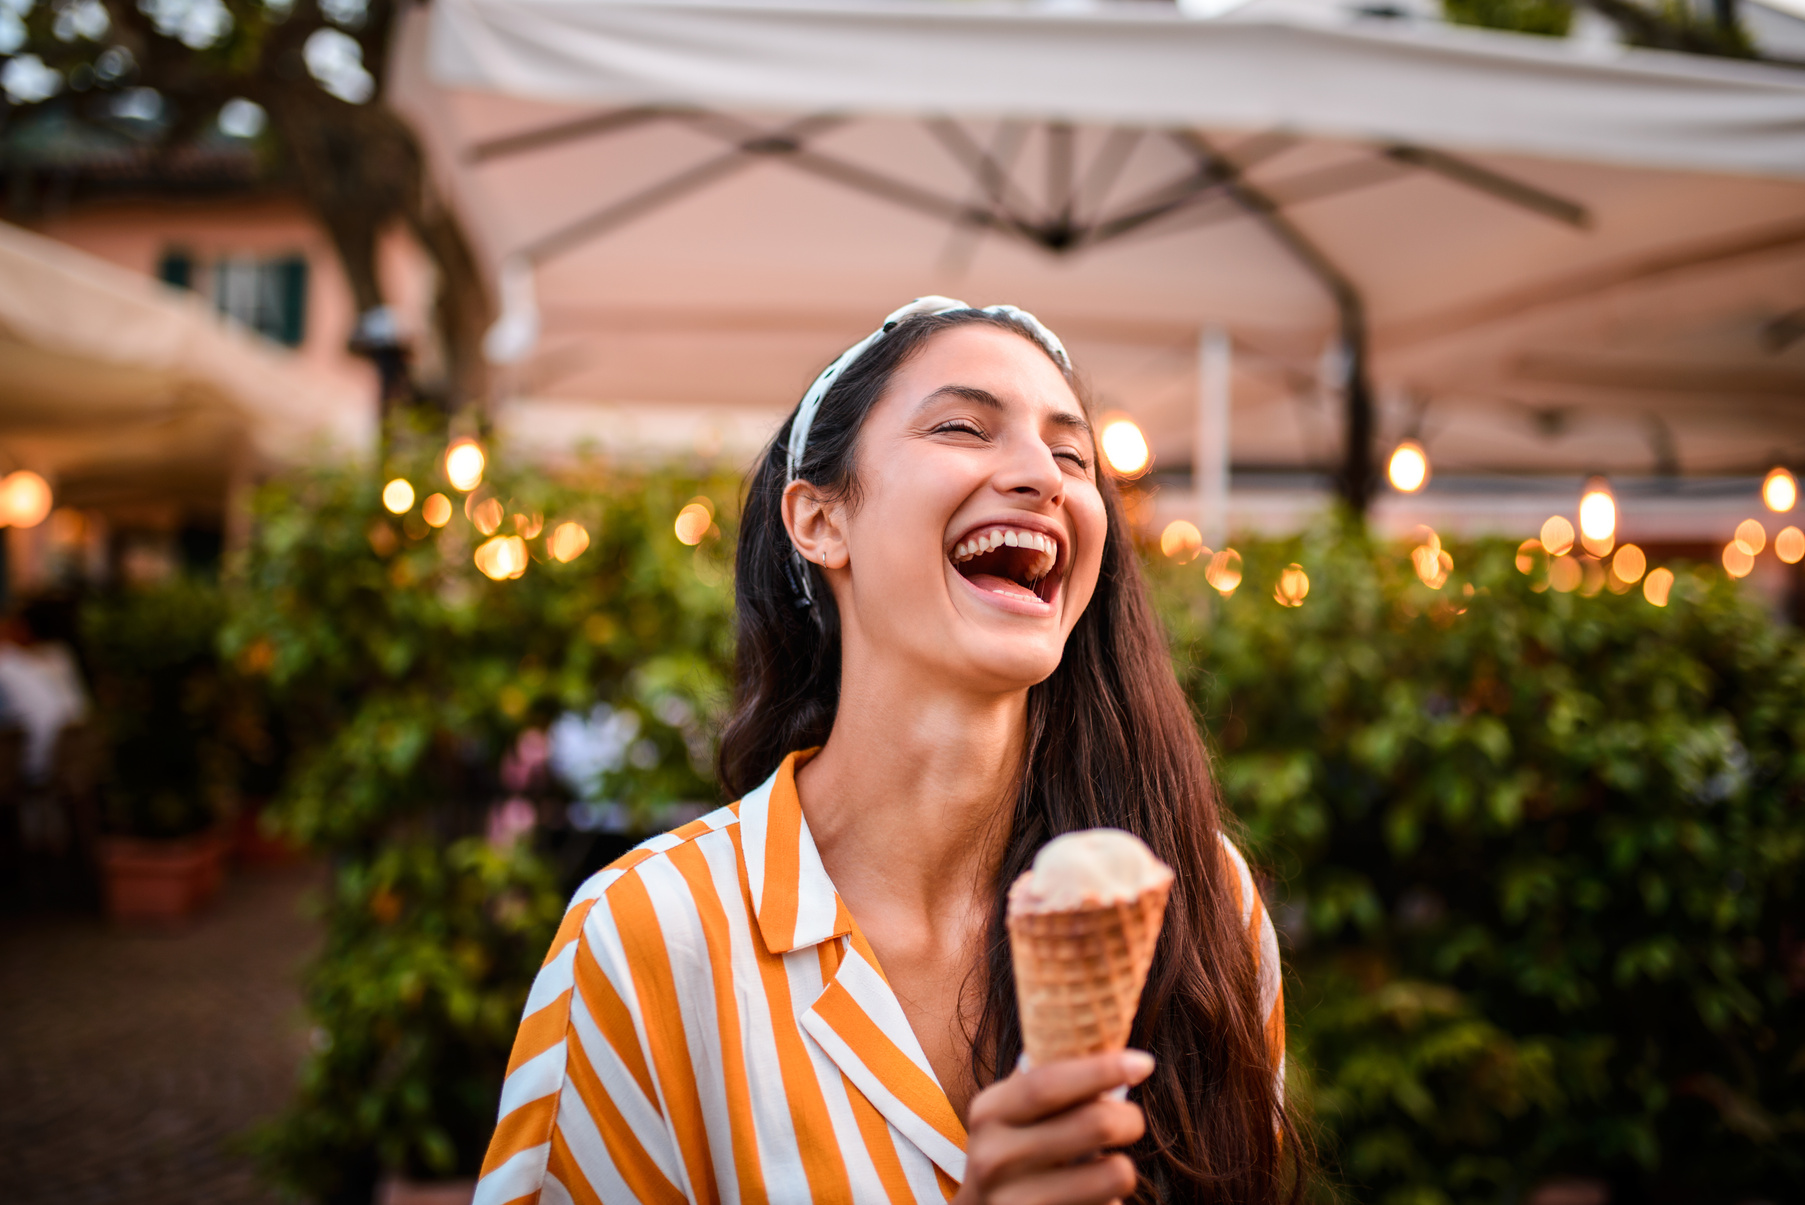 Laughing woman eating ice cream.